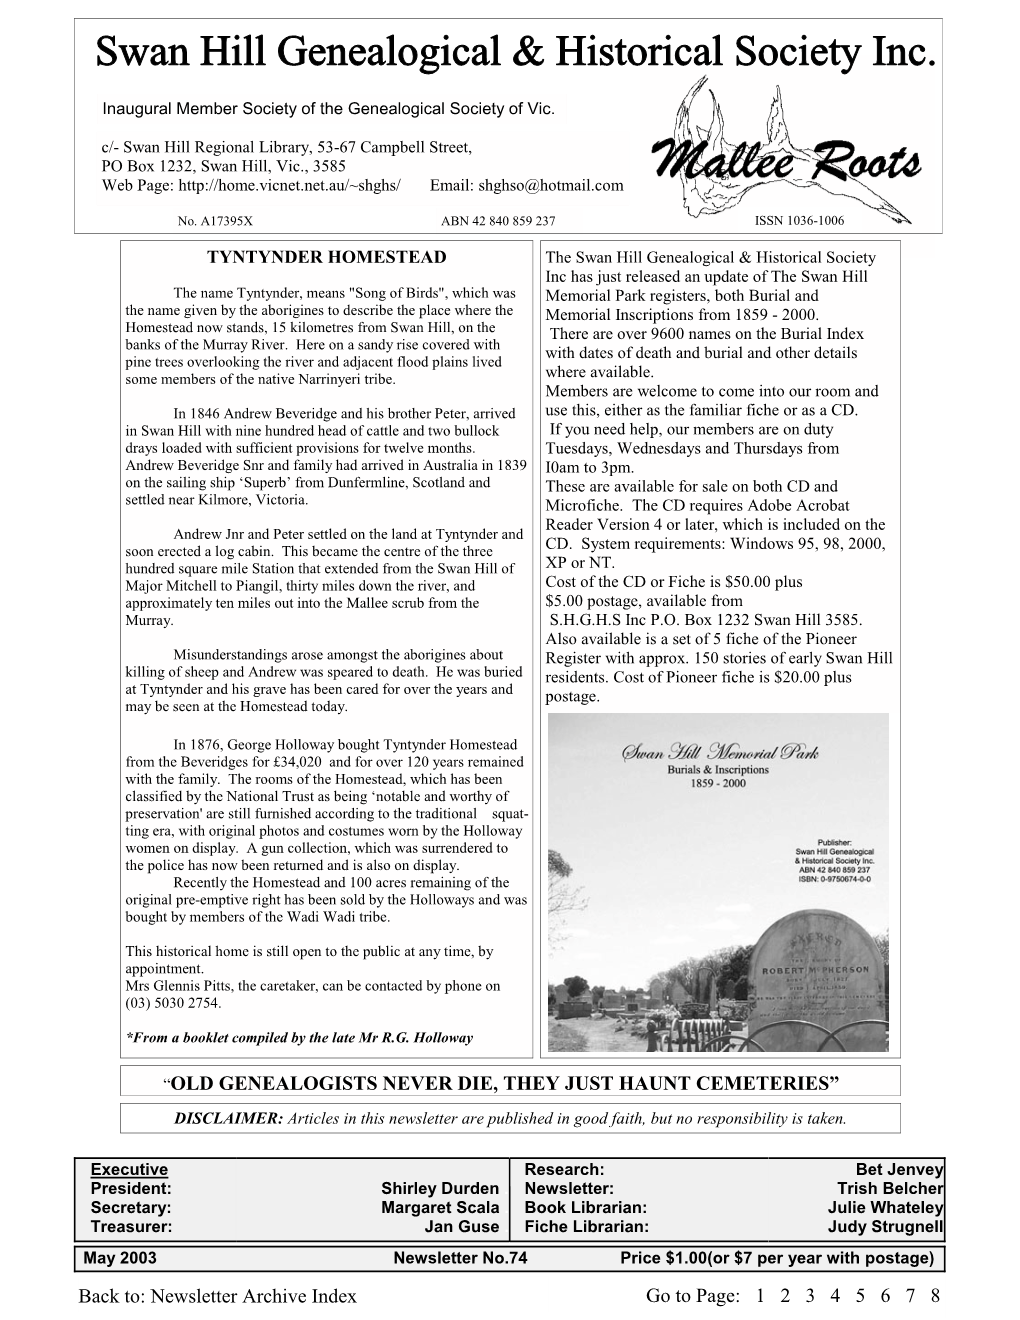 OLD GENEALOGISTS NEVER DIE, THEY JUST HAUNT CEMETERIES” DISCLAIMER: Articles in This Newsletter Are Published in Good Faith, but No Responsibility Is Taken